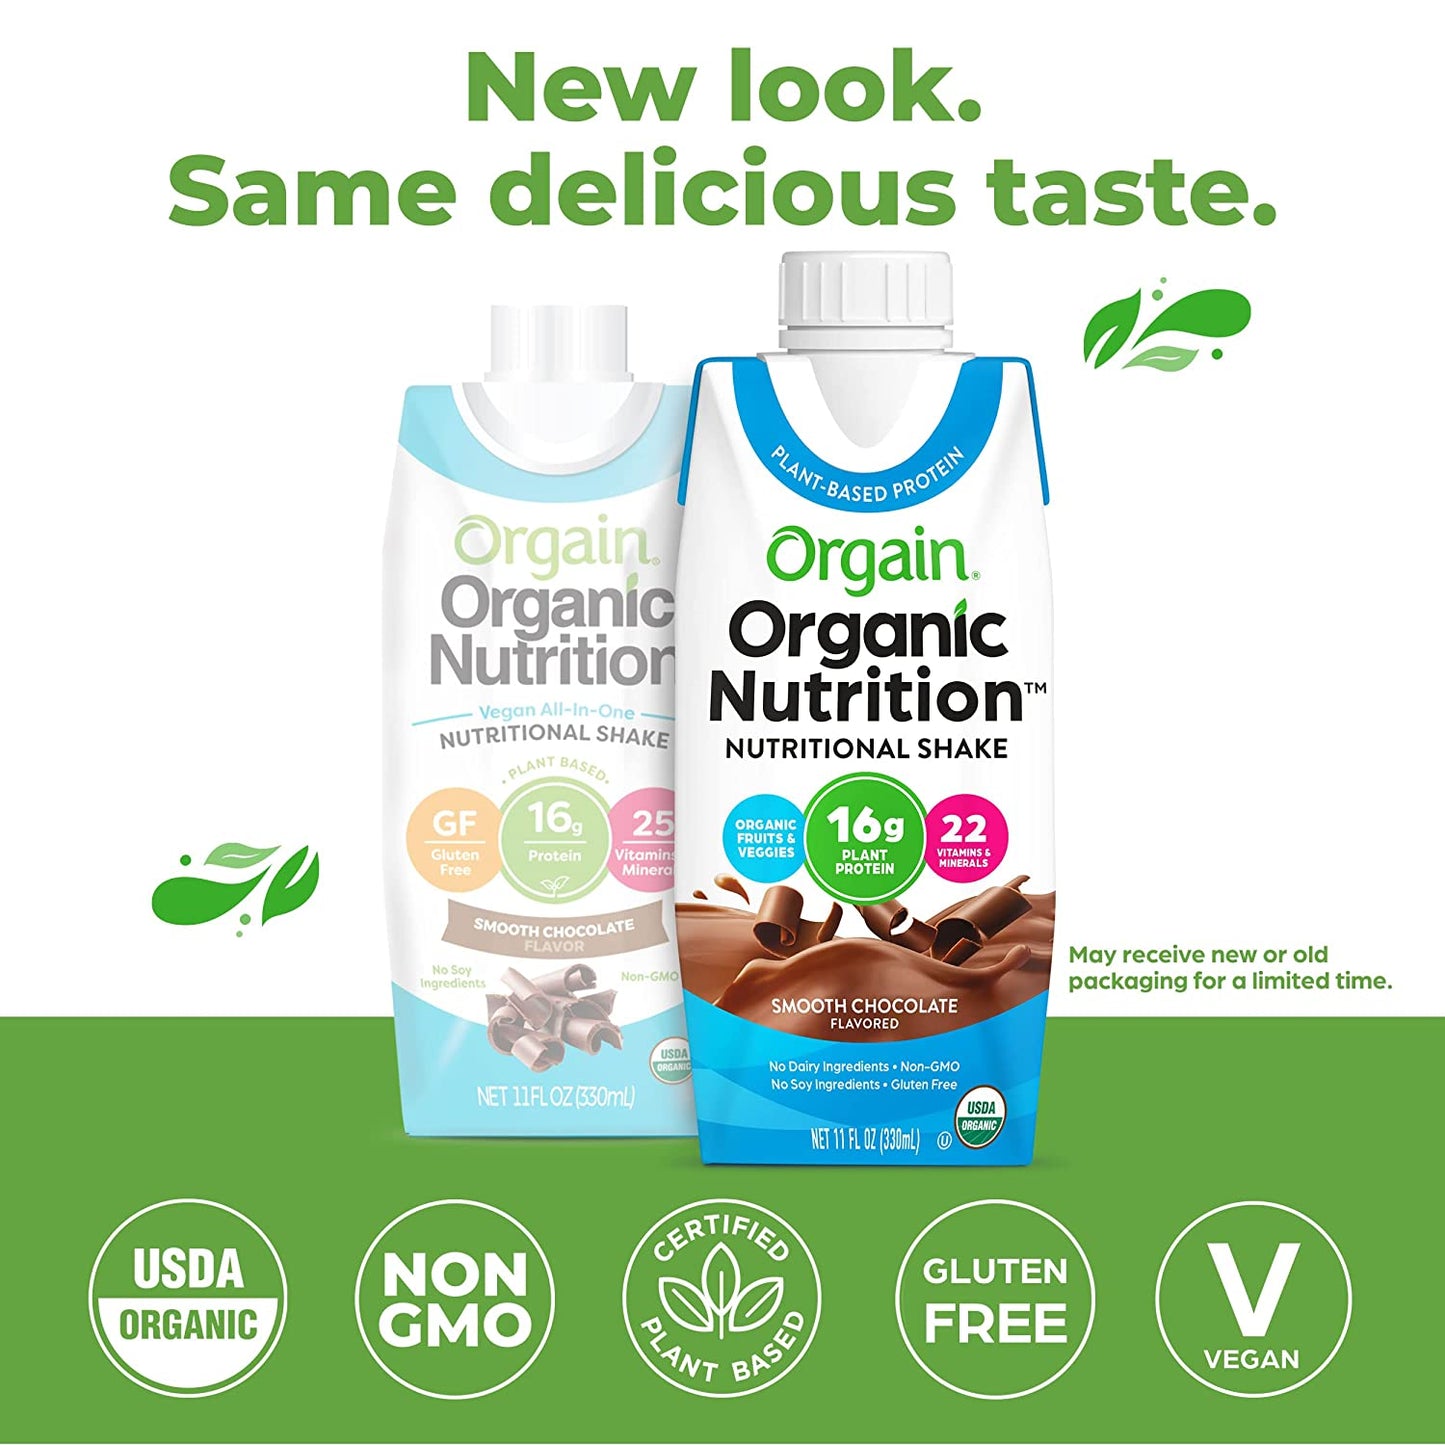 Orgain Organic Vegan Plant Based Nutritional Shake, Smooth Chocolate - Meal Replacement, 16g Protein, 22 Vitamins & Minerals, Dairy Free, Gluten Free, 11 Ounce, 12 Count (Packaging May Vary)